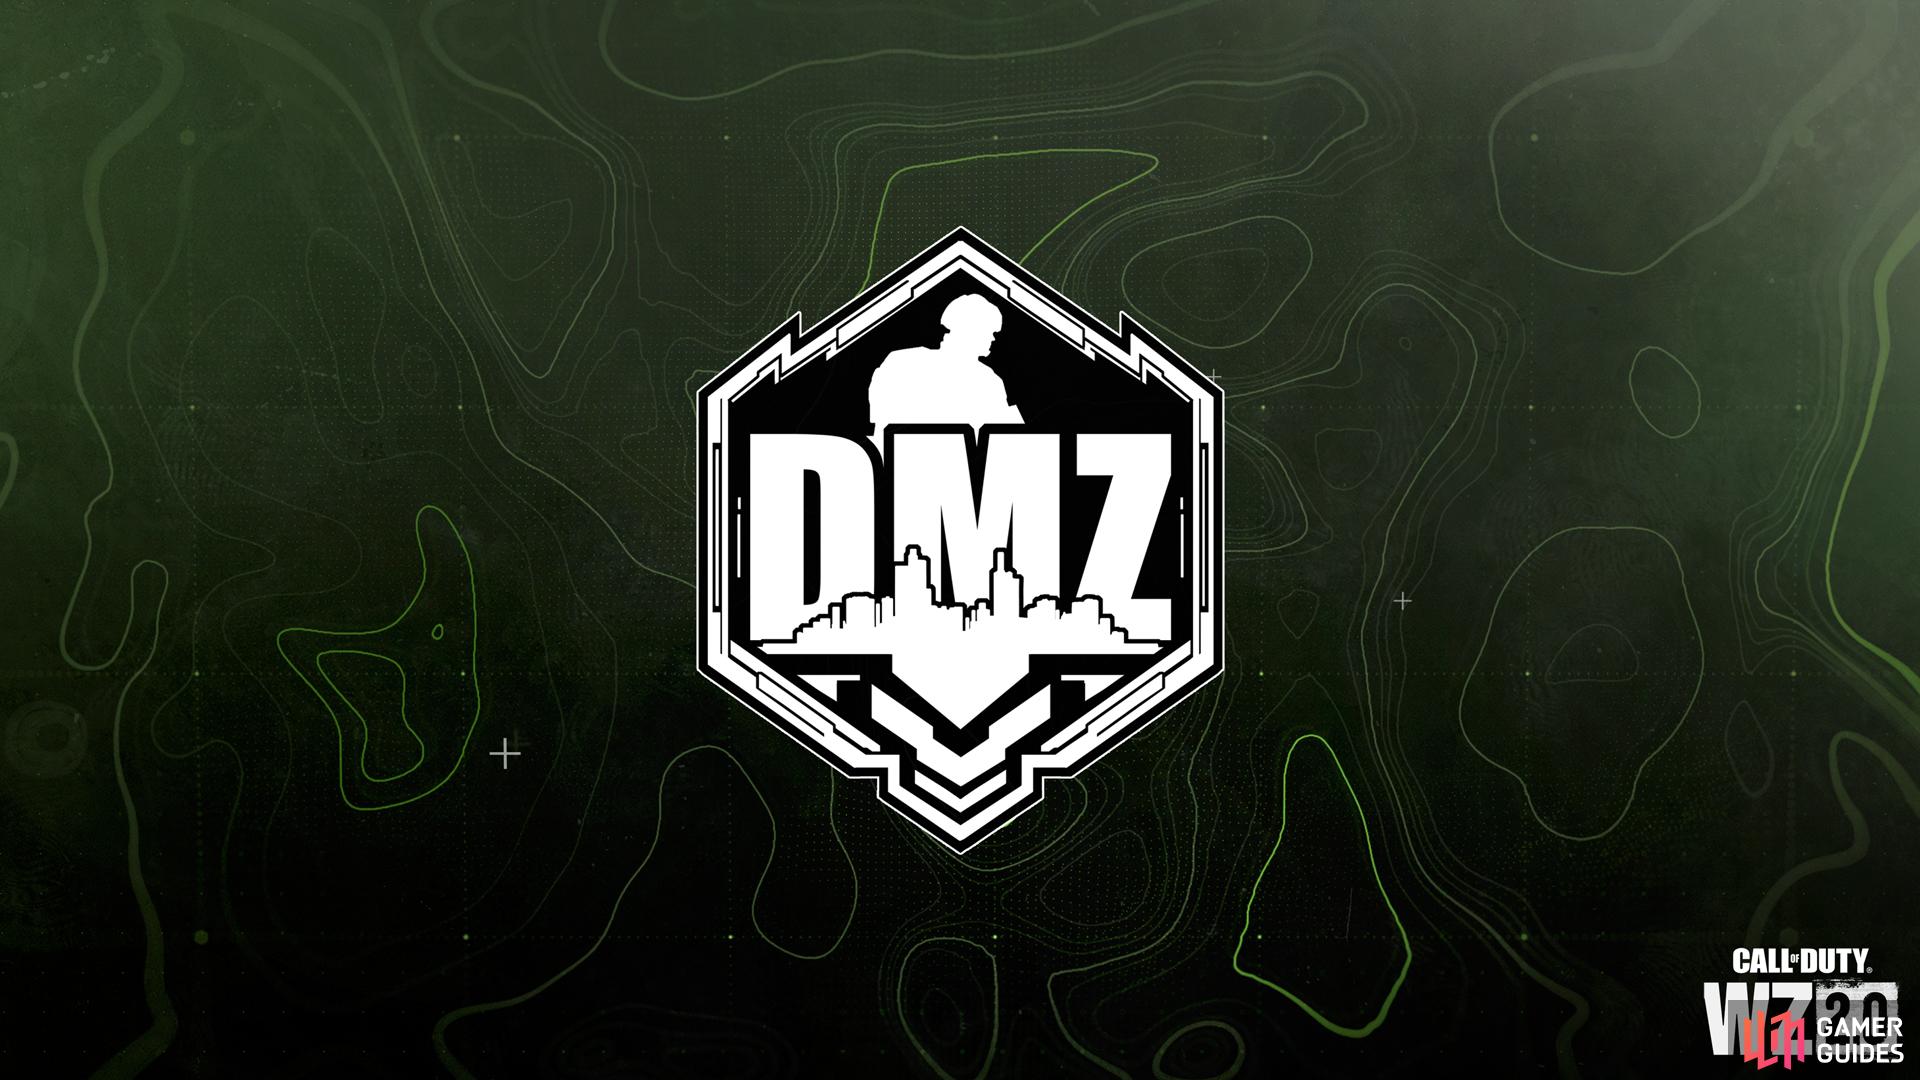 DMZ will arrive in just a few days’ time but the information remains scarce. (Image courtesy of callofduty.com)